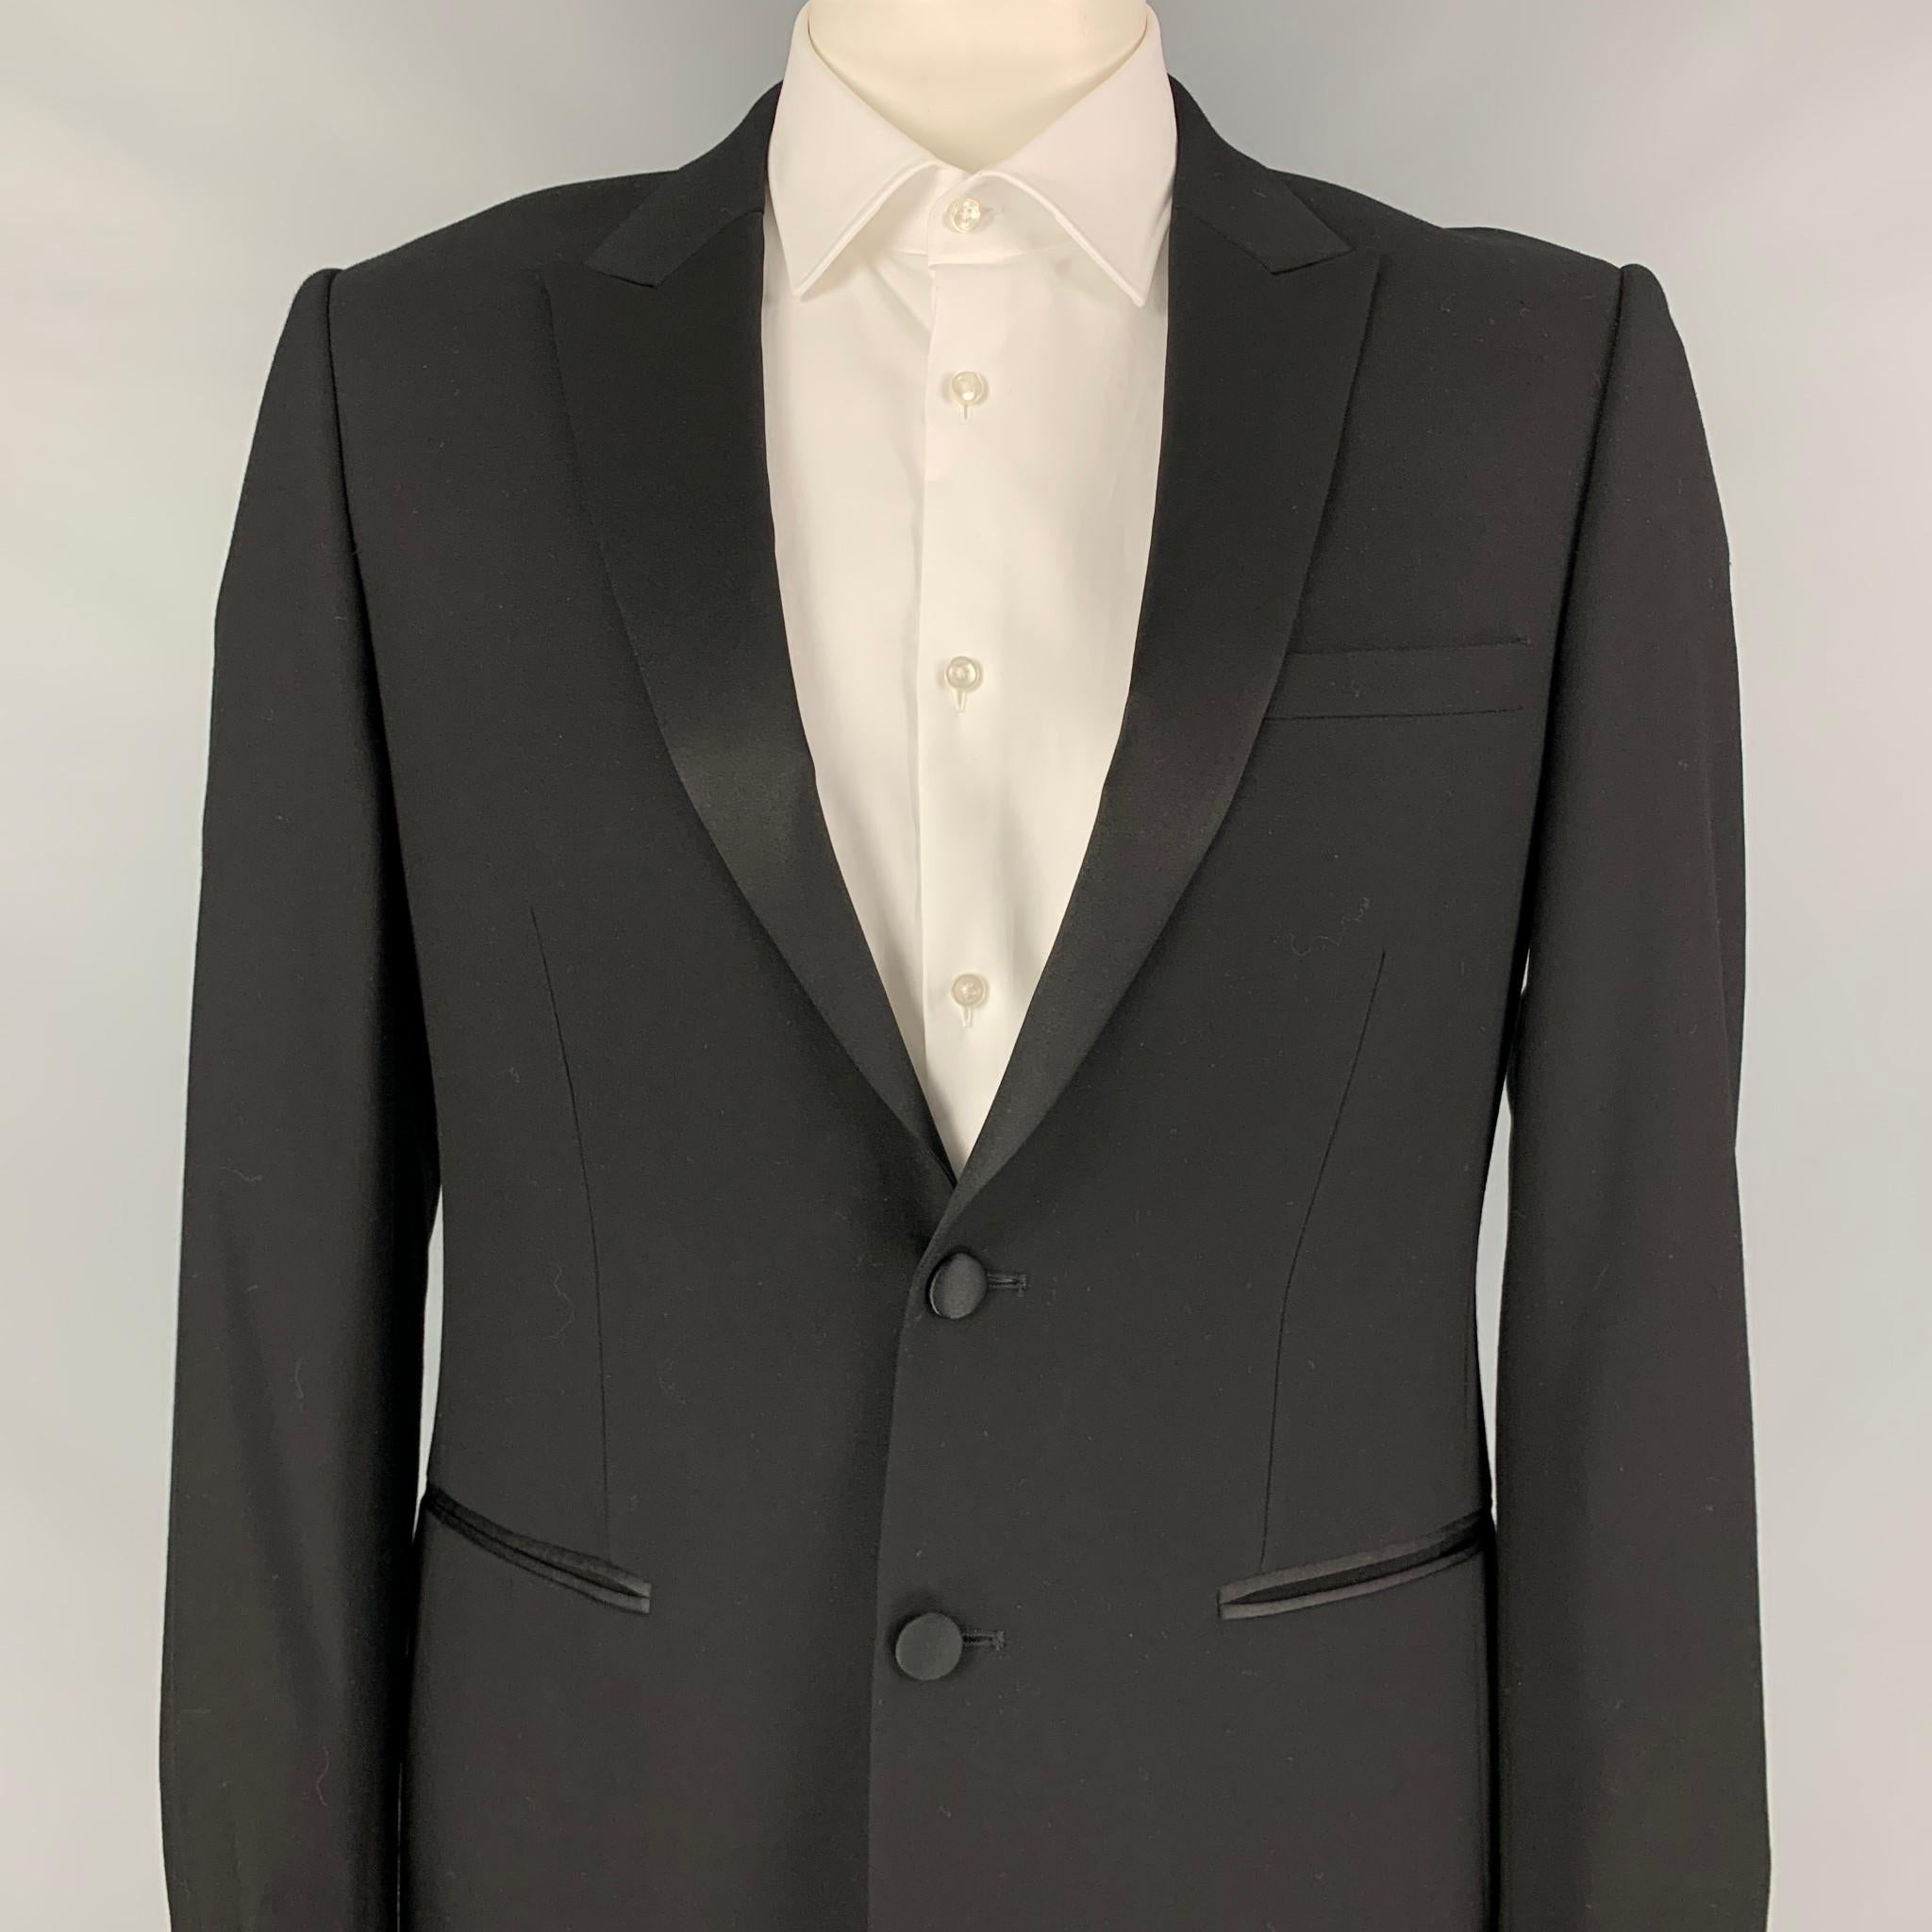 SANDRO sport coat comes in a black wool with a full liner featuring a peak lapel, slit pockets, single back vent, and a double button closure. 

Excellent Pre-Owned Condition.
Marked: 52

Measurements:

Shoulder: 18 in.
Chest: 42 in.
Sleeve: 27.5